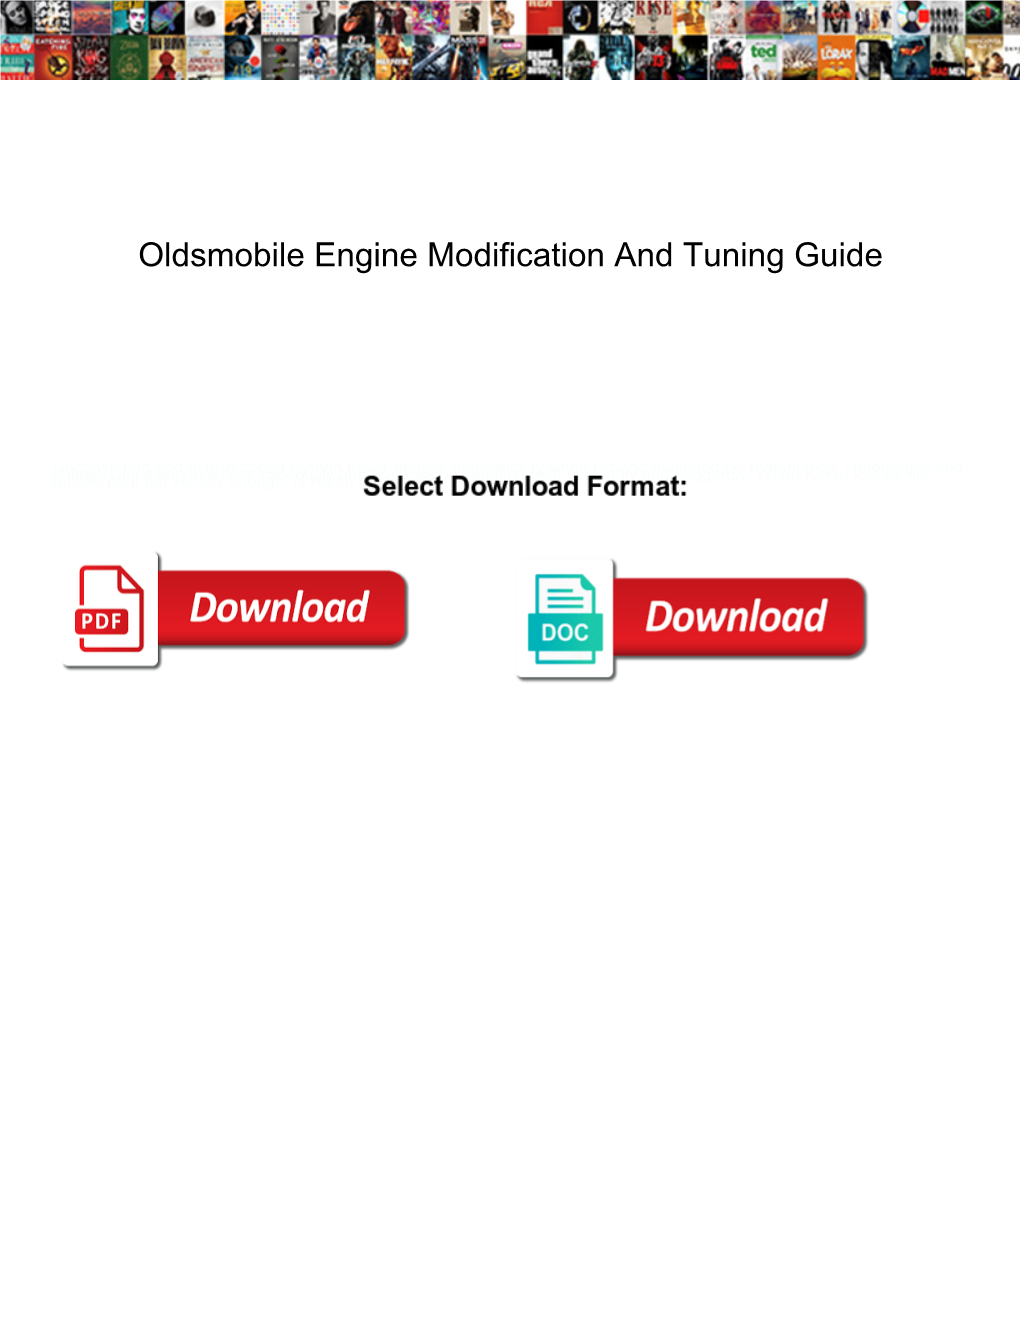 Oldsmobile Engine Modification and Tuning Guide